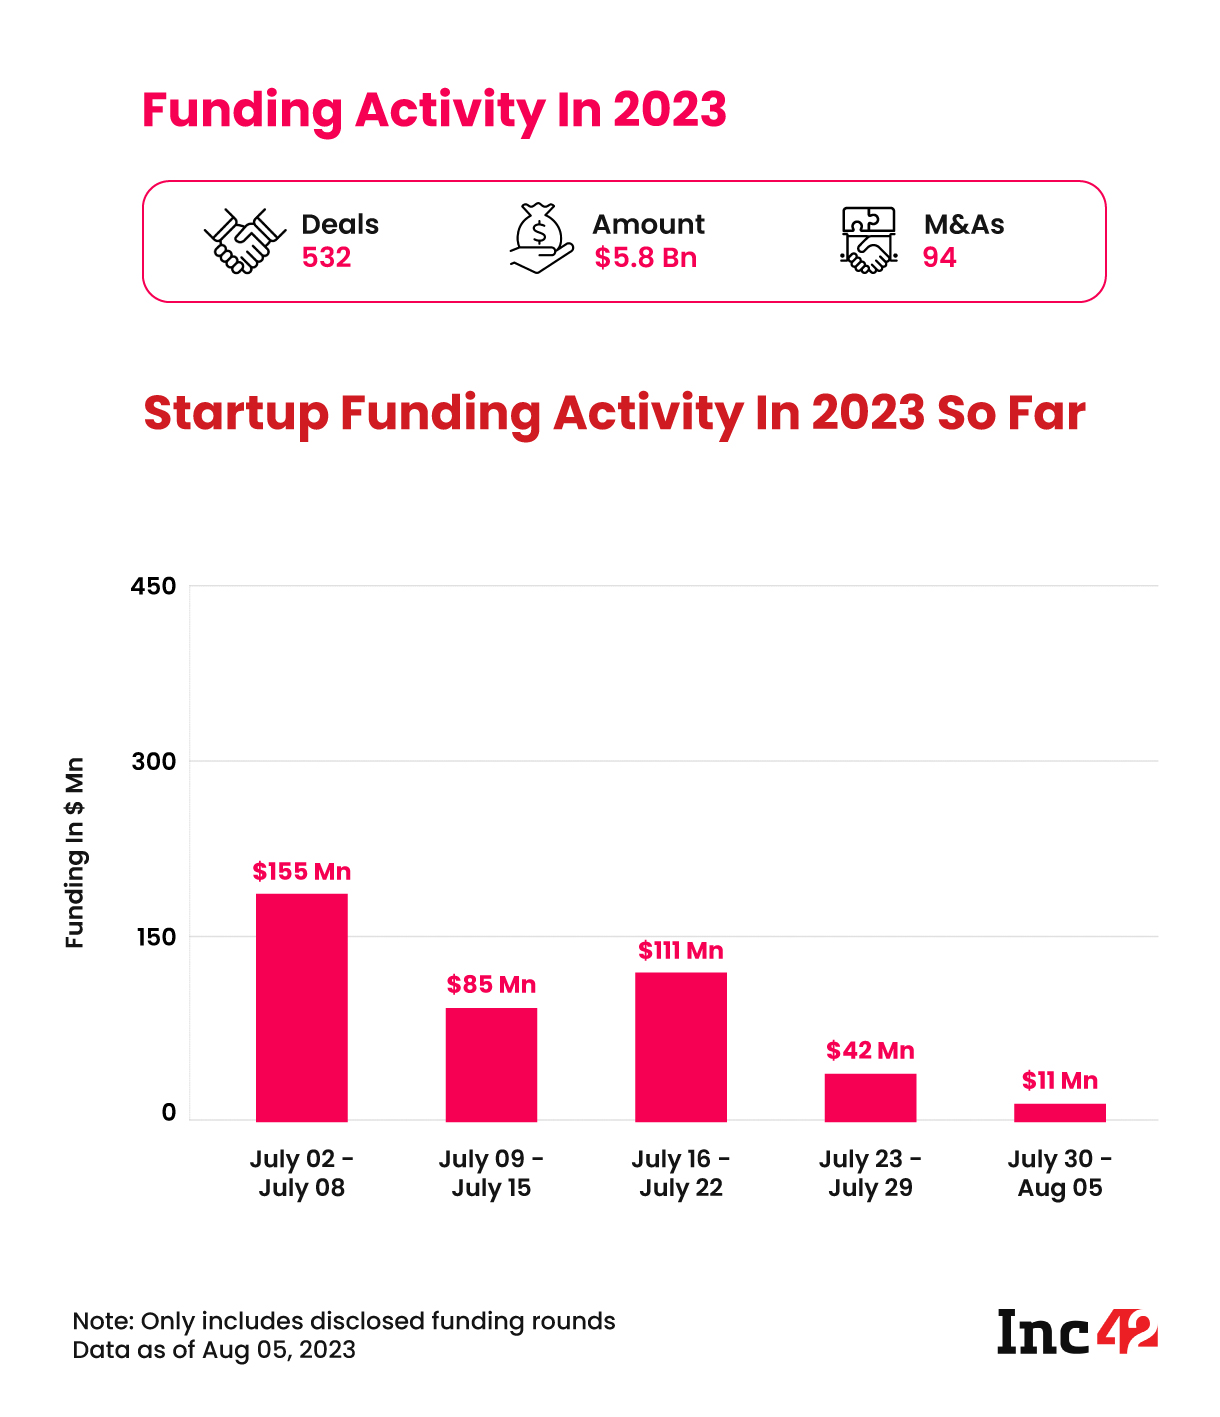 Indian startup funding hit a new weekly low with just $11.5 Mn raised across 9 deals. This is a massive 74% fall from the already-low funding numbers of the previous week